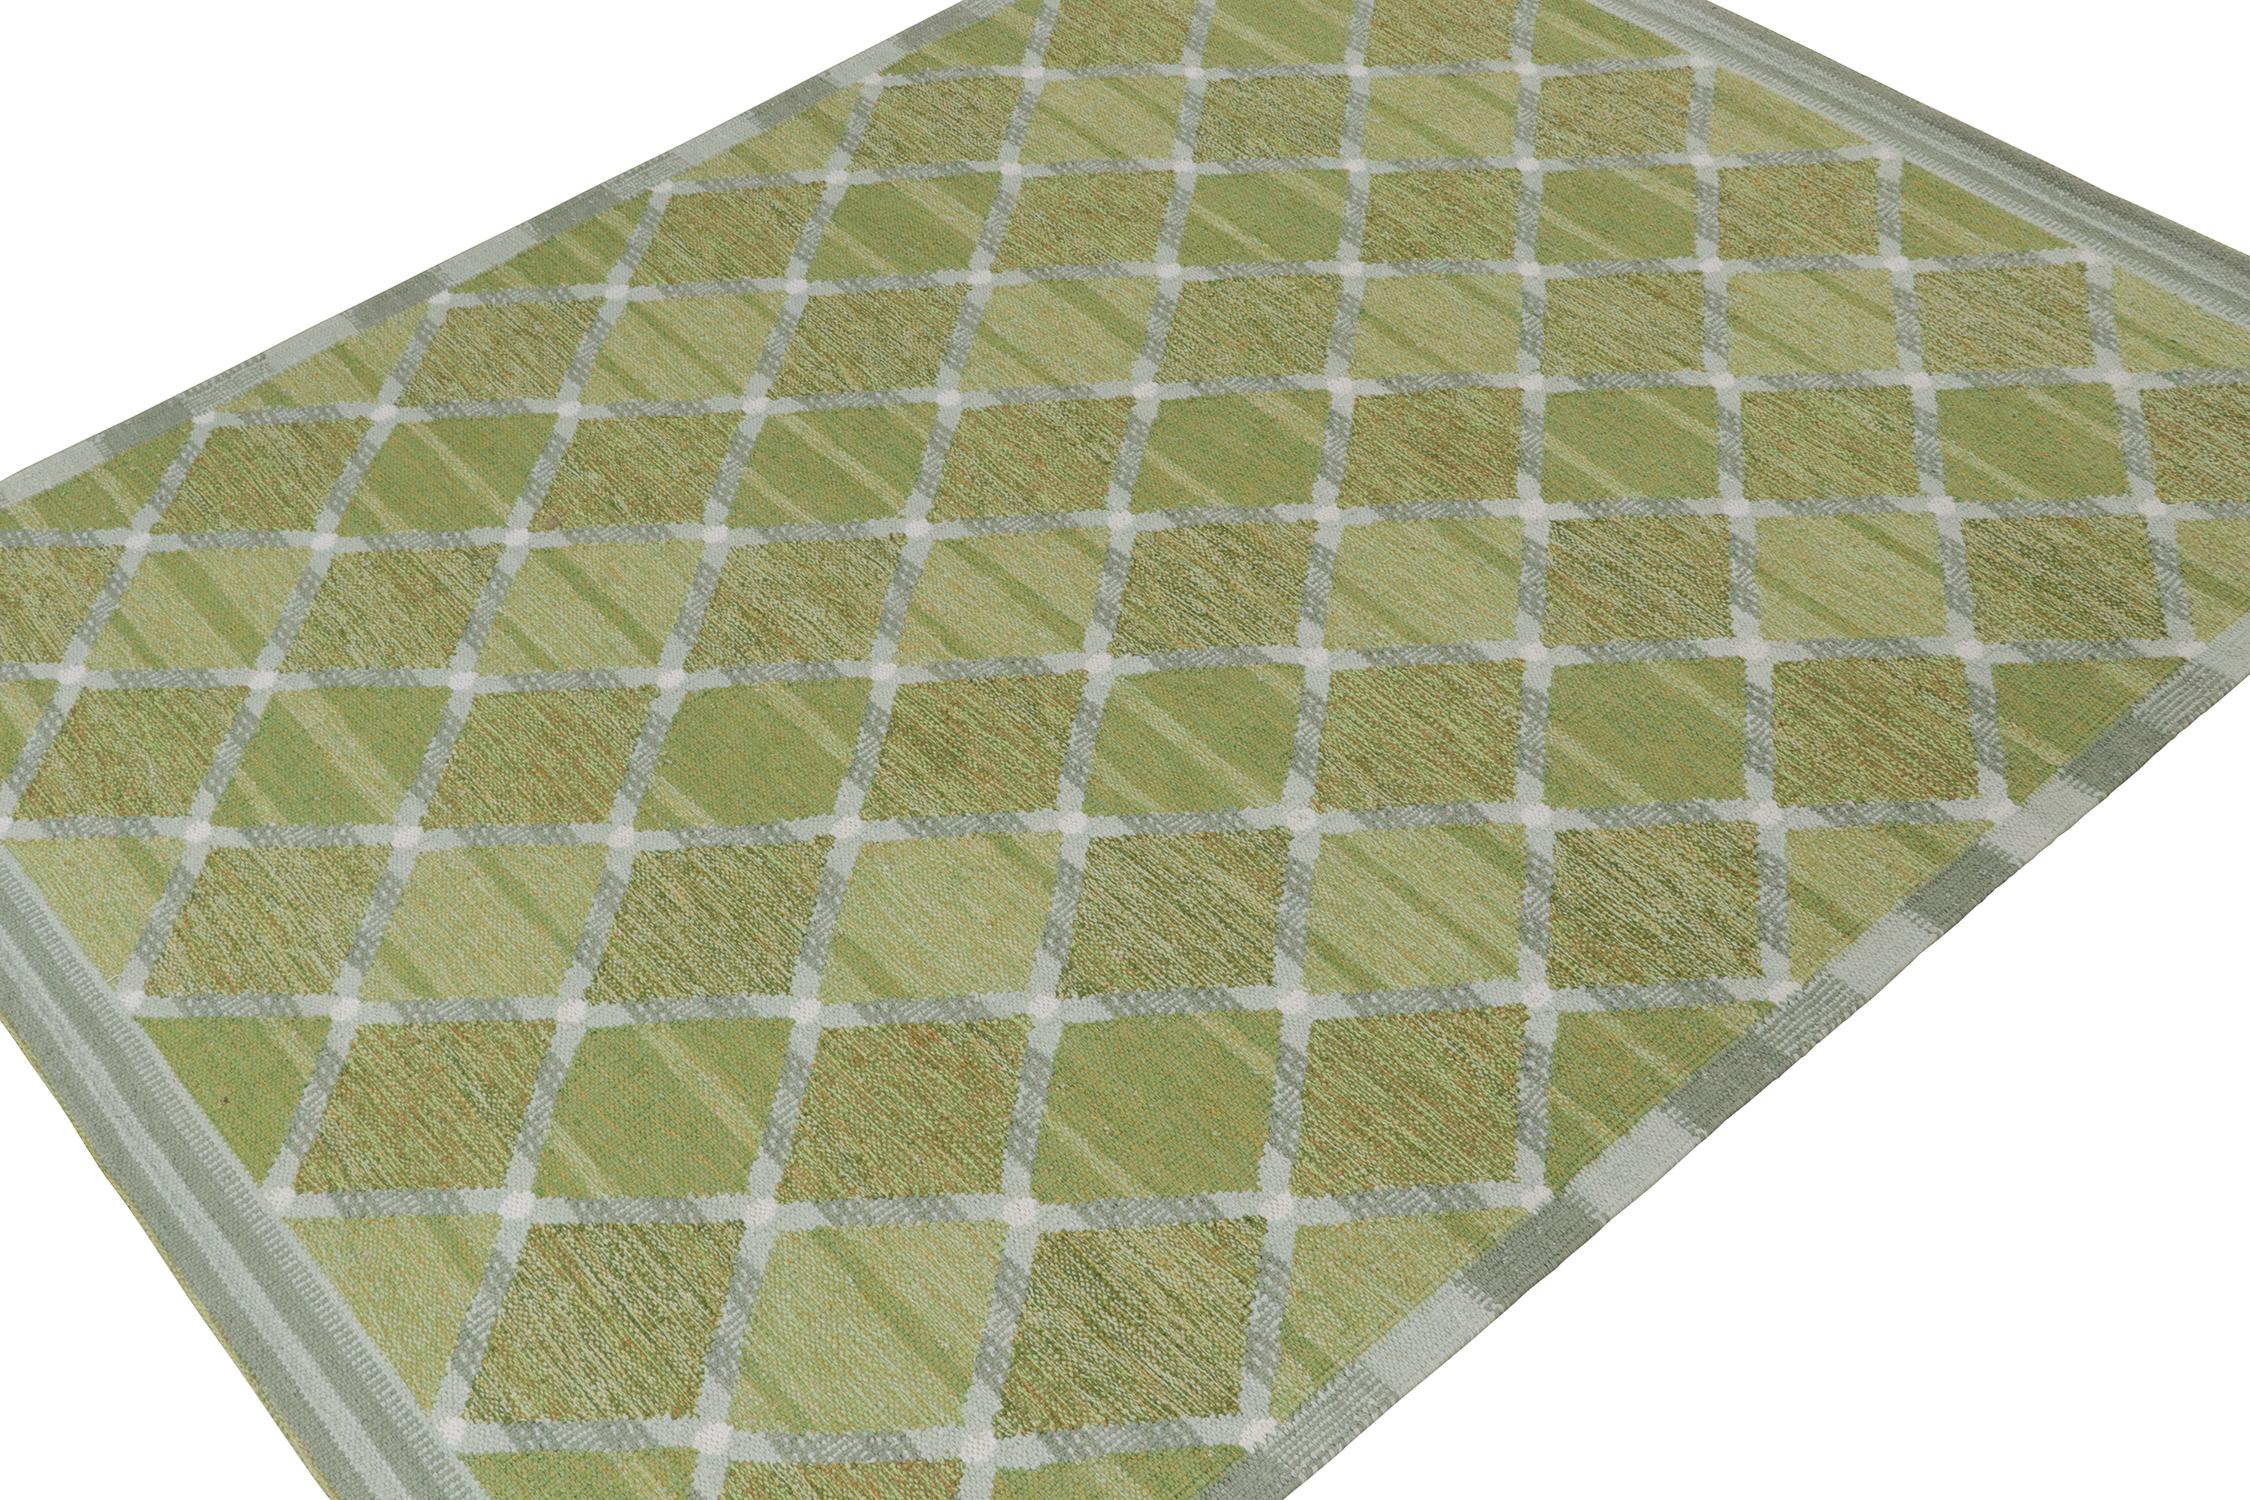 This Swedish style custom kilim design is new to Rug & Kilim's award-winning Scandinavian flat weave collection. Handwoven in cotton. 
Further On the Design: 
This design enjoys a soothing diamond lattice with refreshing colors in chartreuse green